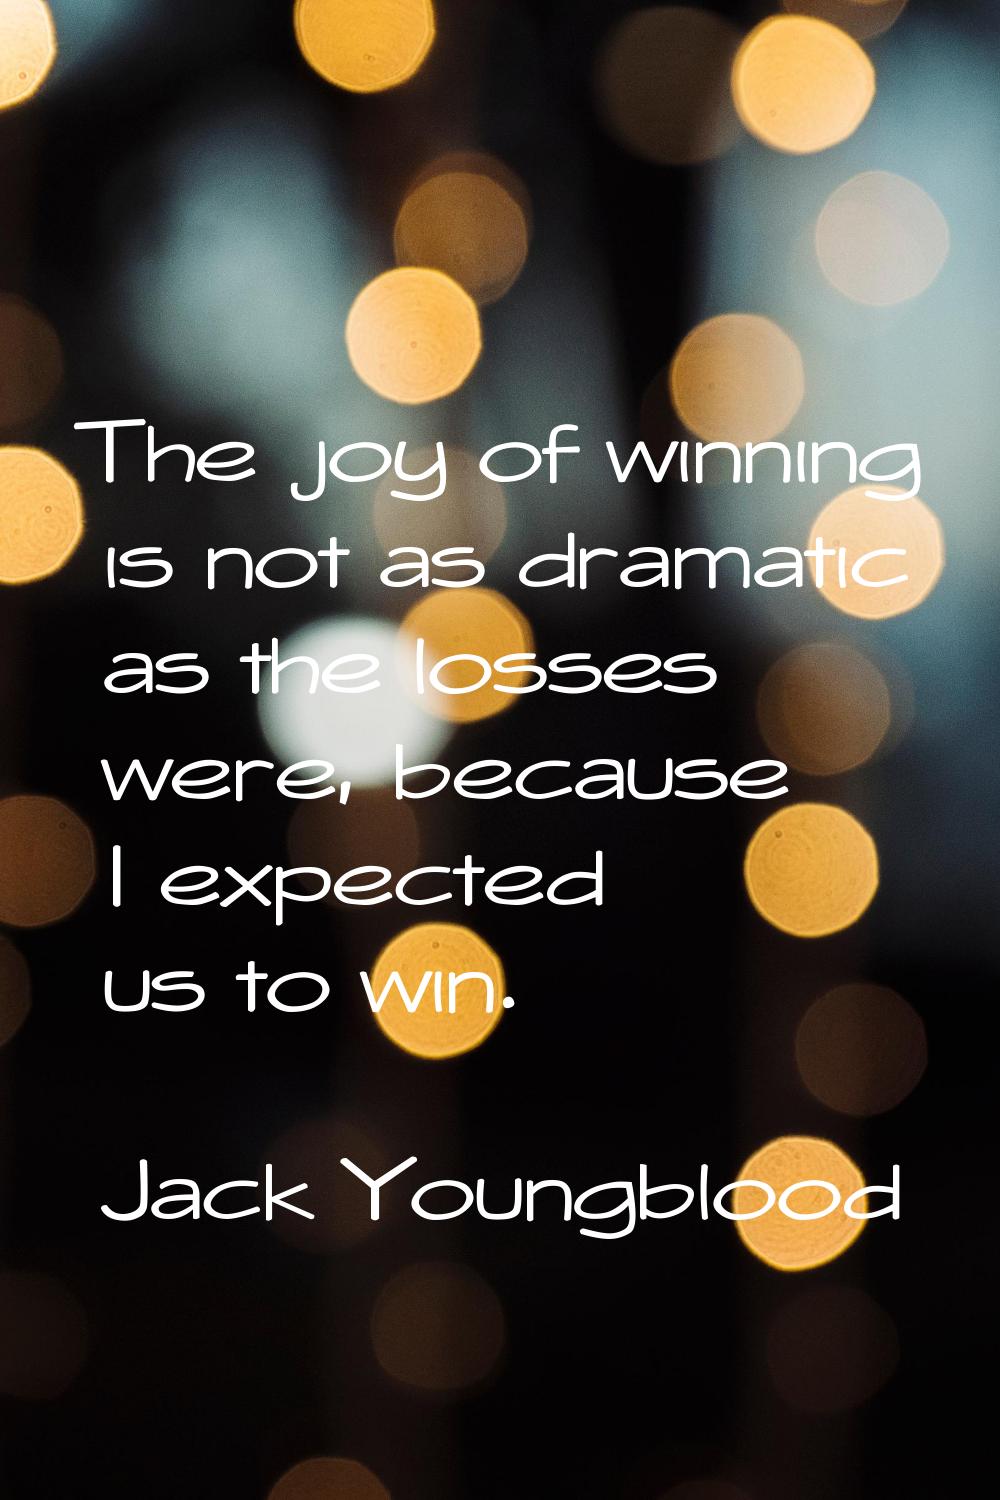 The joy of winning is not as dramatic as the losses were, because I expected us to win.